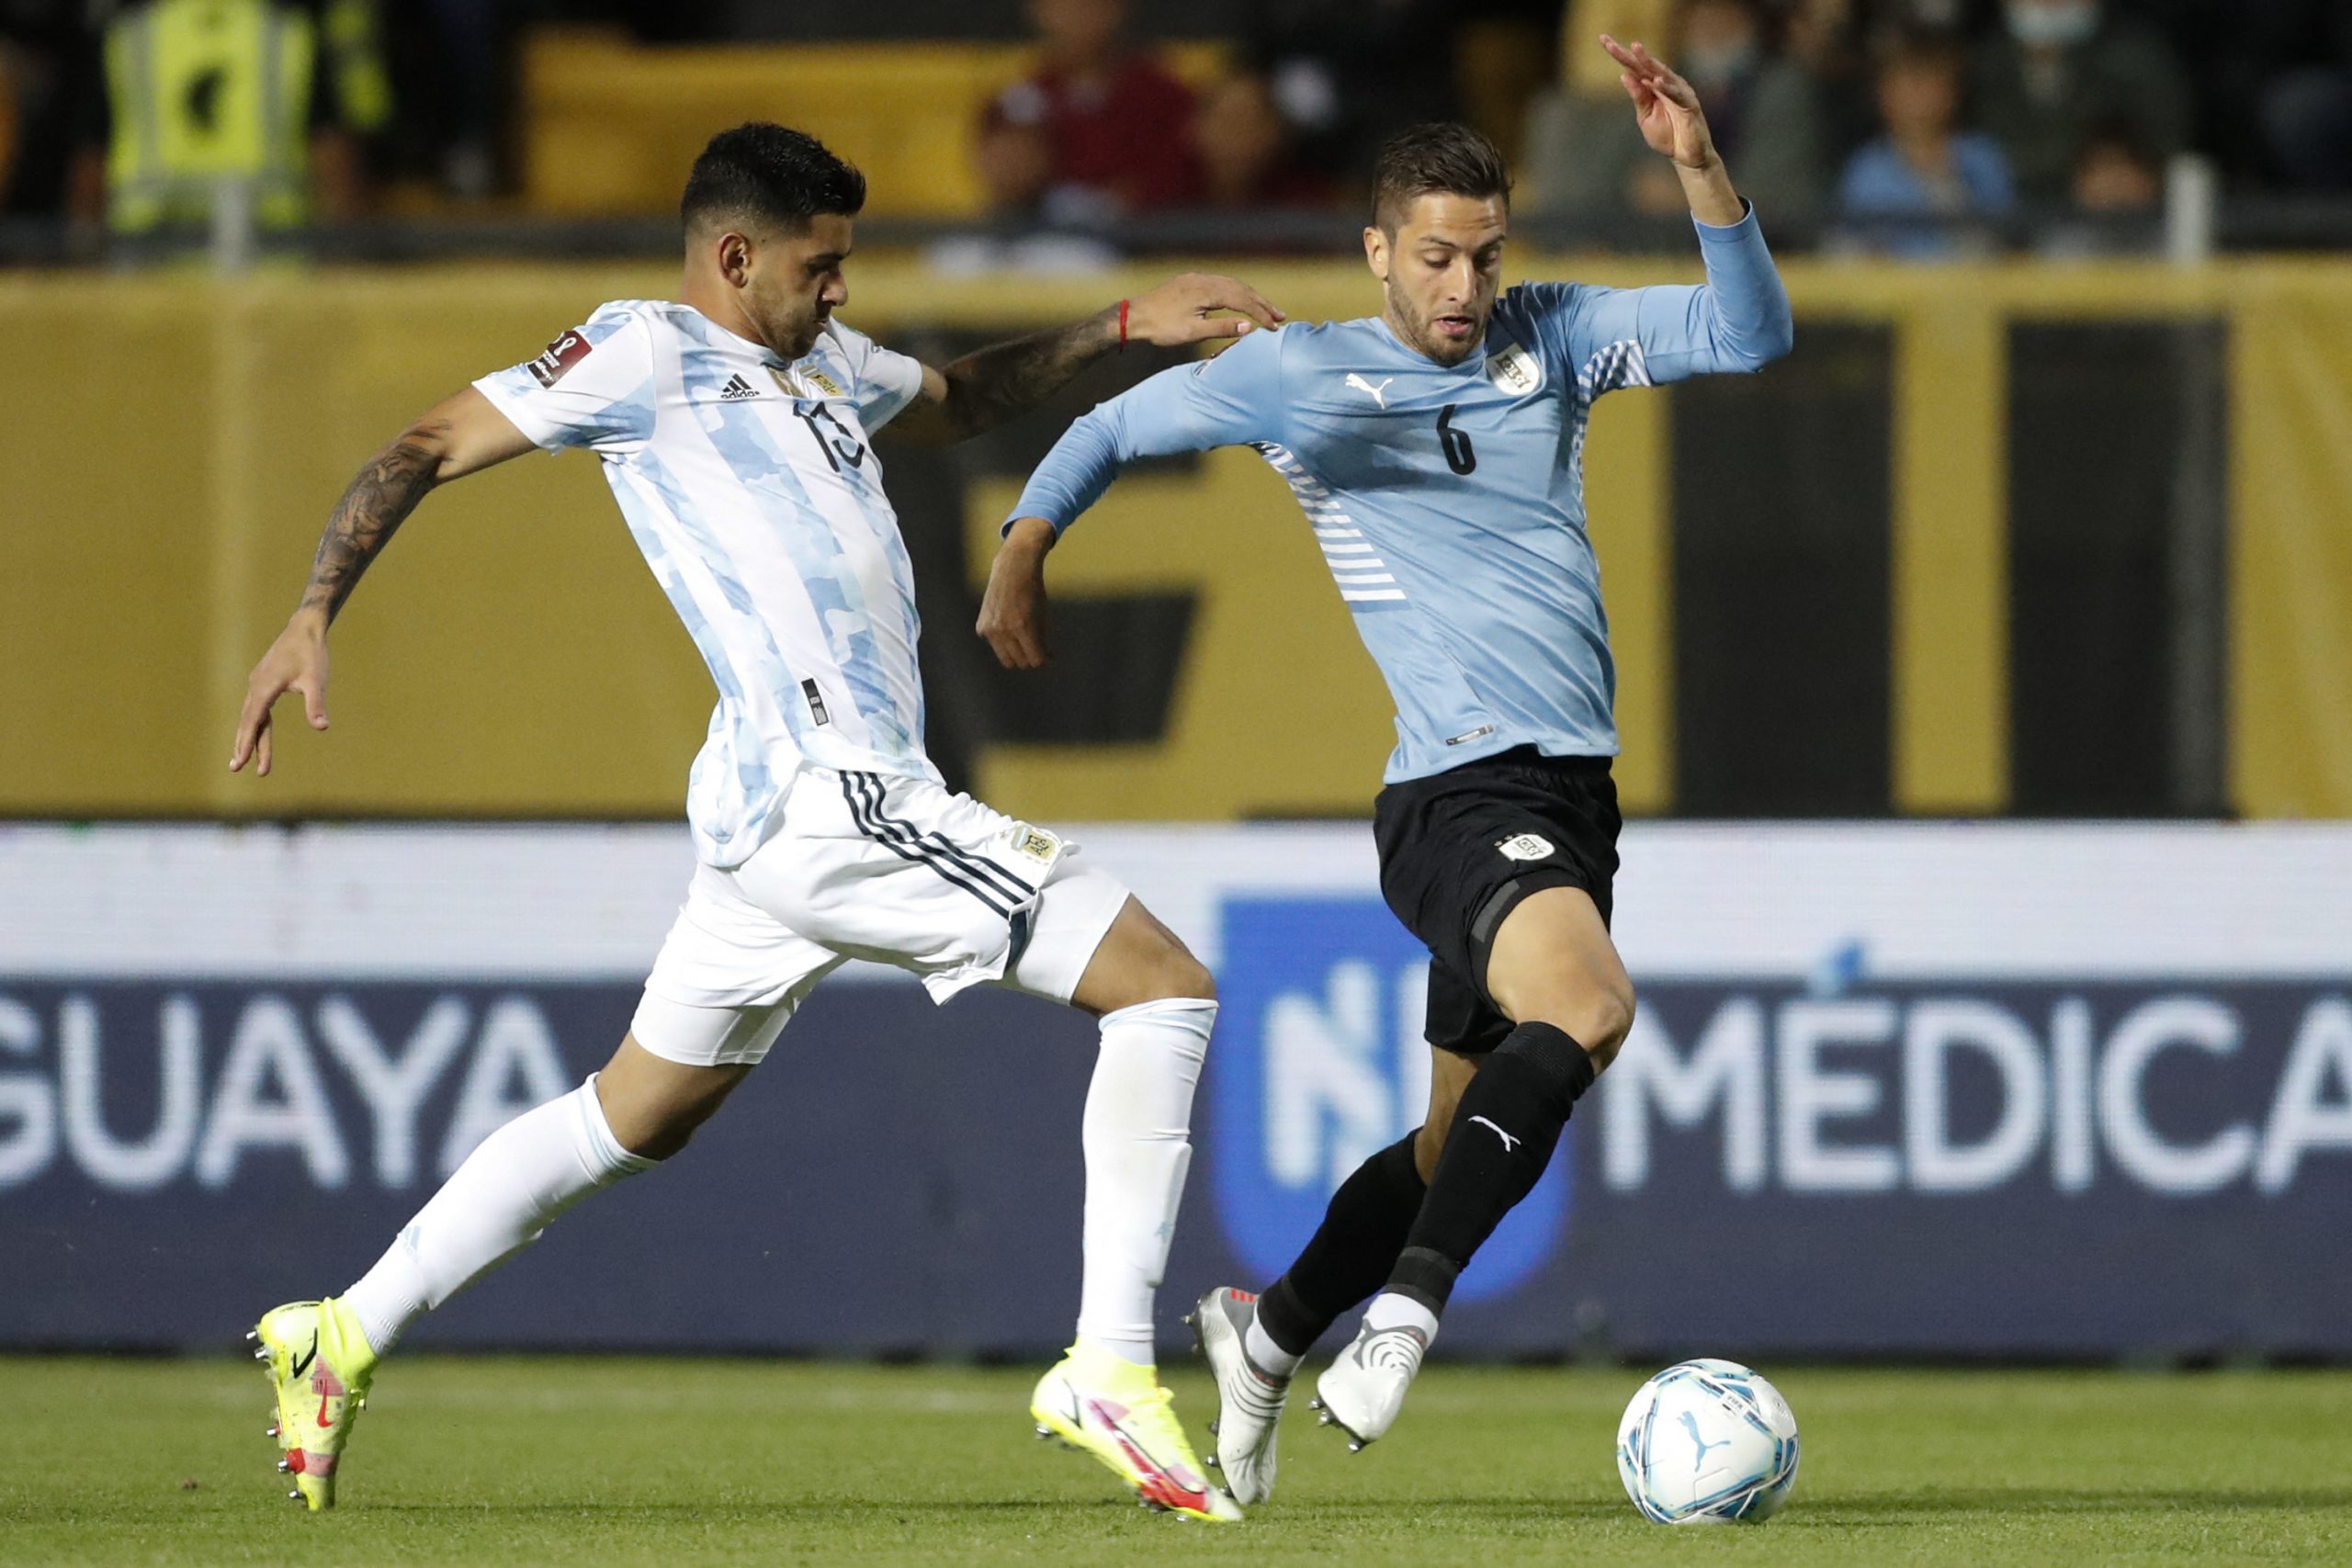 Argentina's Cristian Romero (L) and Uruguay's Rodrigo Bentancur vie for the ball during their South American qualification football match for the FIFA World Cup Qatar 2022 at the Campeon del Siglo stadium in Montevideo on November 12, 2021. (Photo by Matilde Campodonico / POOL / AFP) (Photo by MATILDE CAMPODONICO/POOL/AFP via Getty Images)